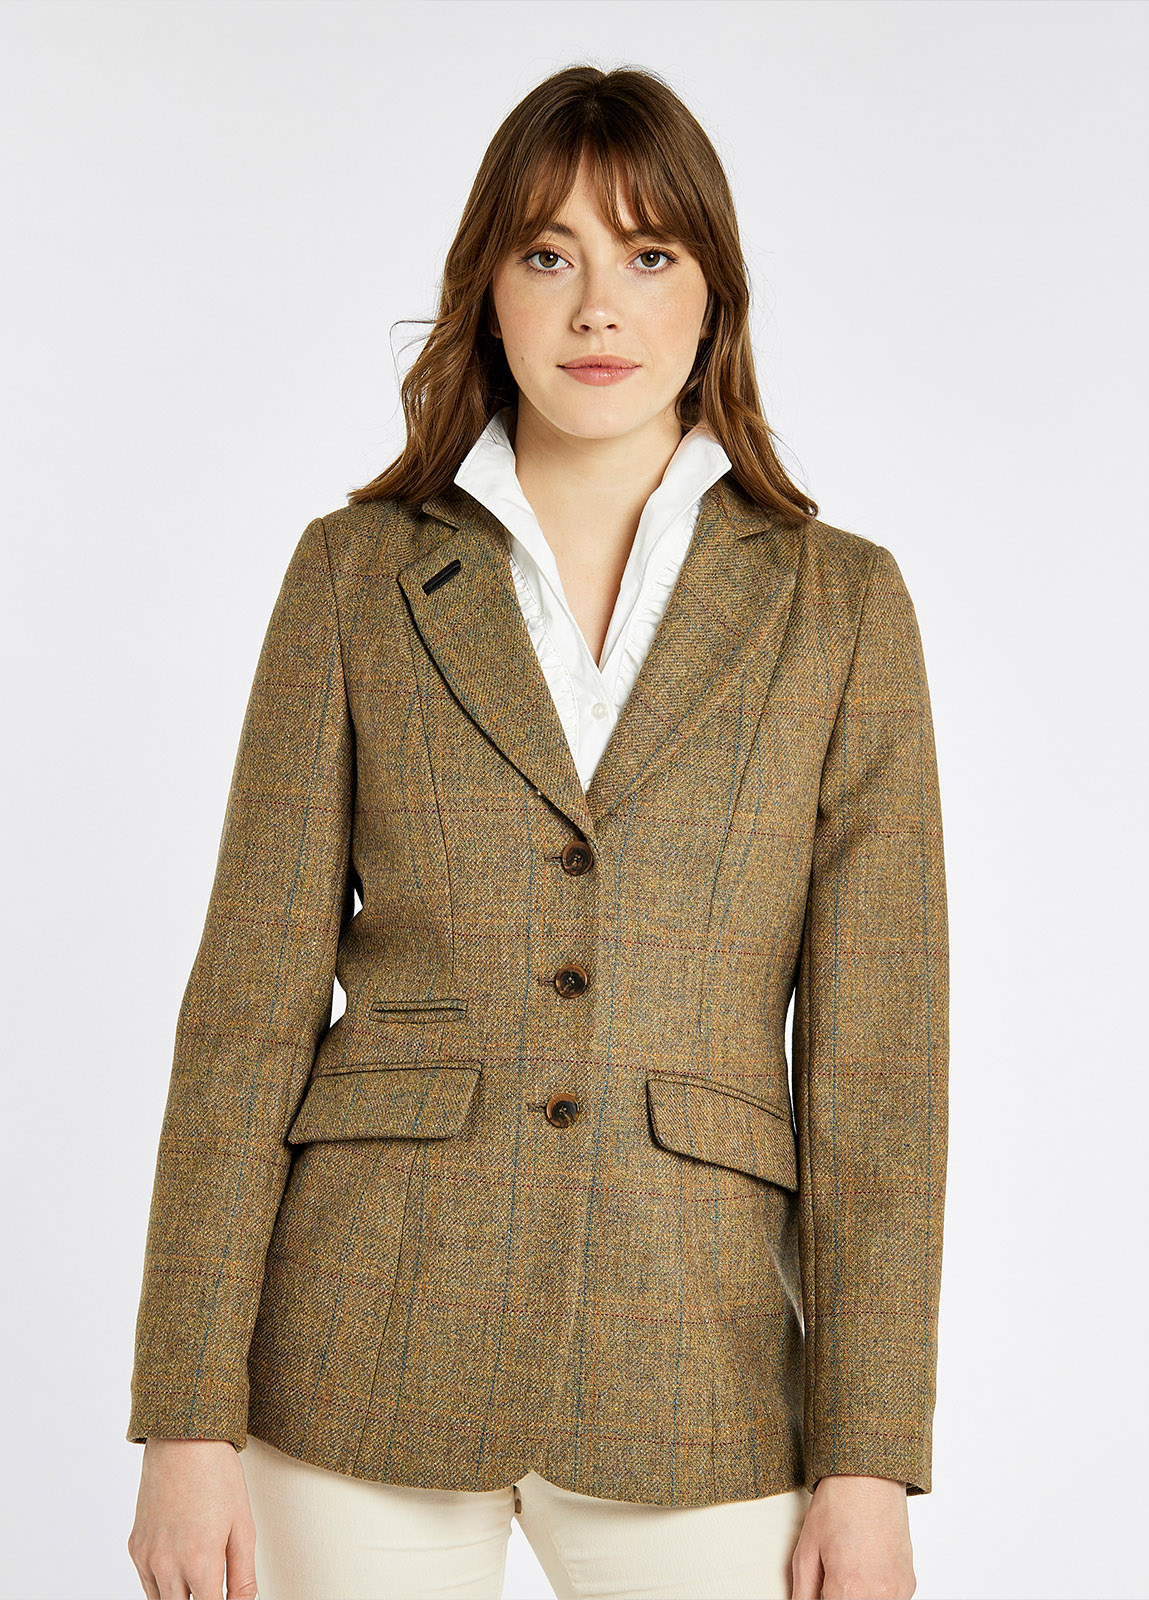 A woman modelling Dubarry women's Darkhedge Tweed Burren Jacket with stripe sleeve lining, buttons and single back vent.